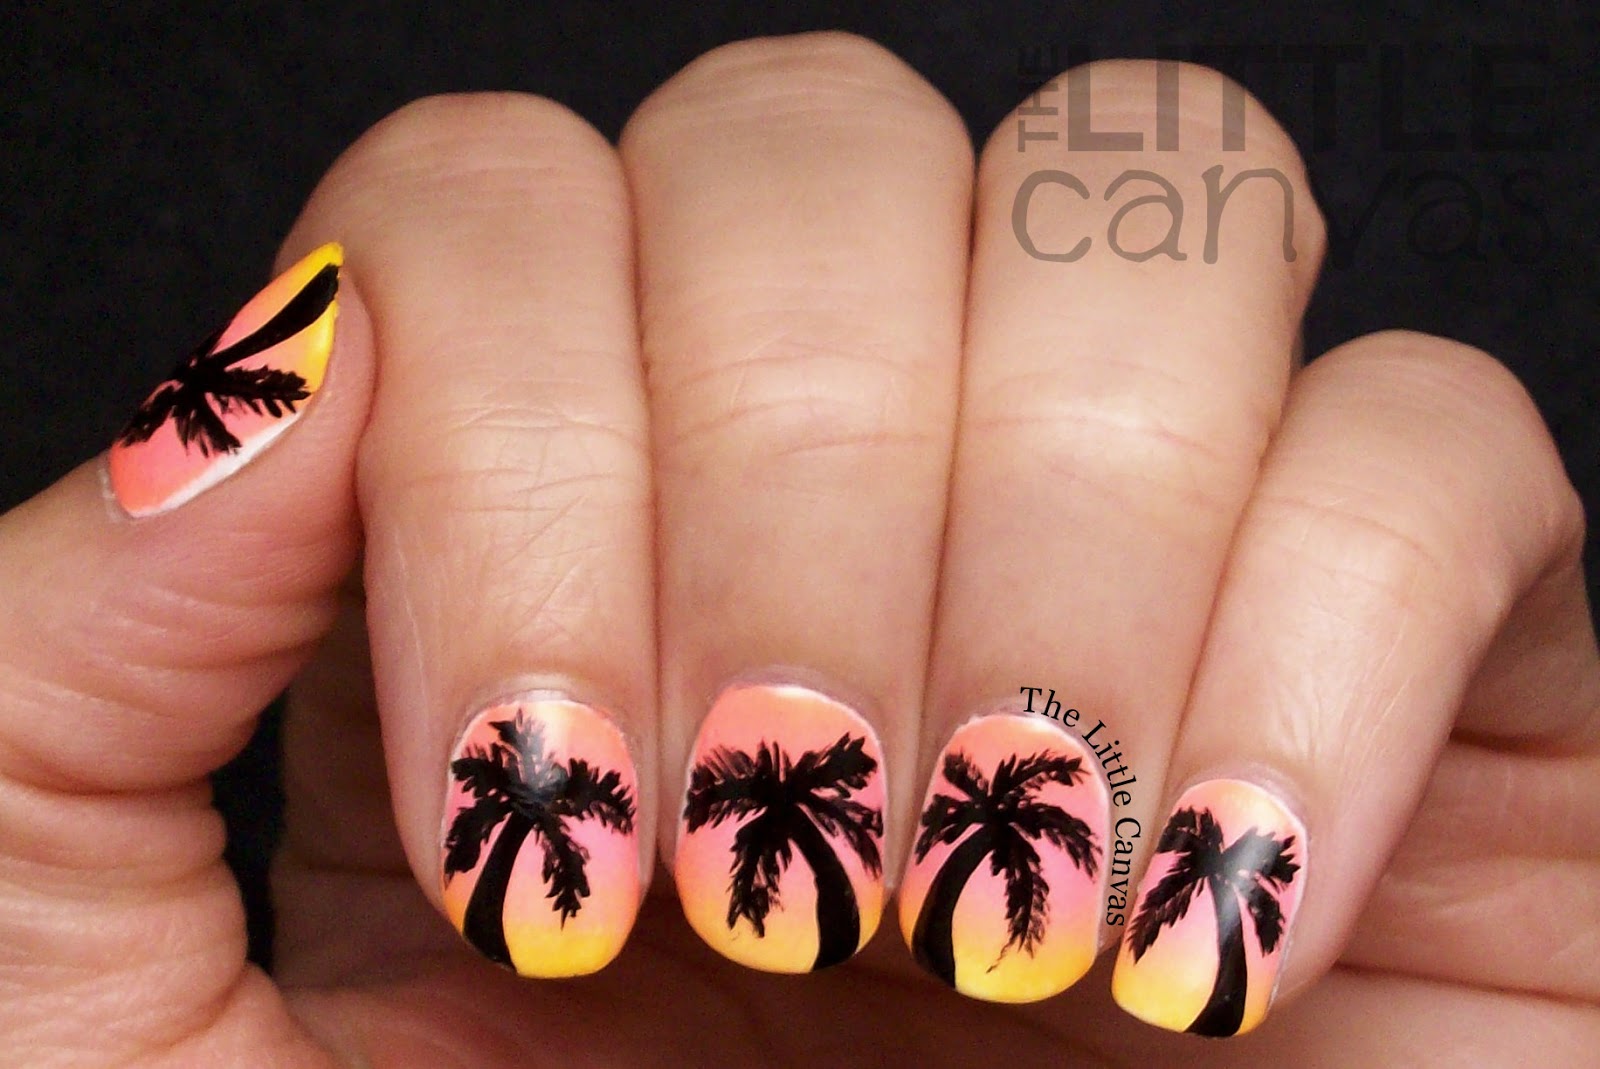 1. "Palm Tree Nail Art Tutorial with Christmas Decorations" - wide 4